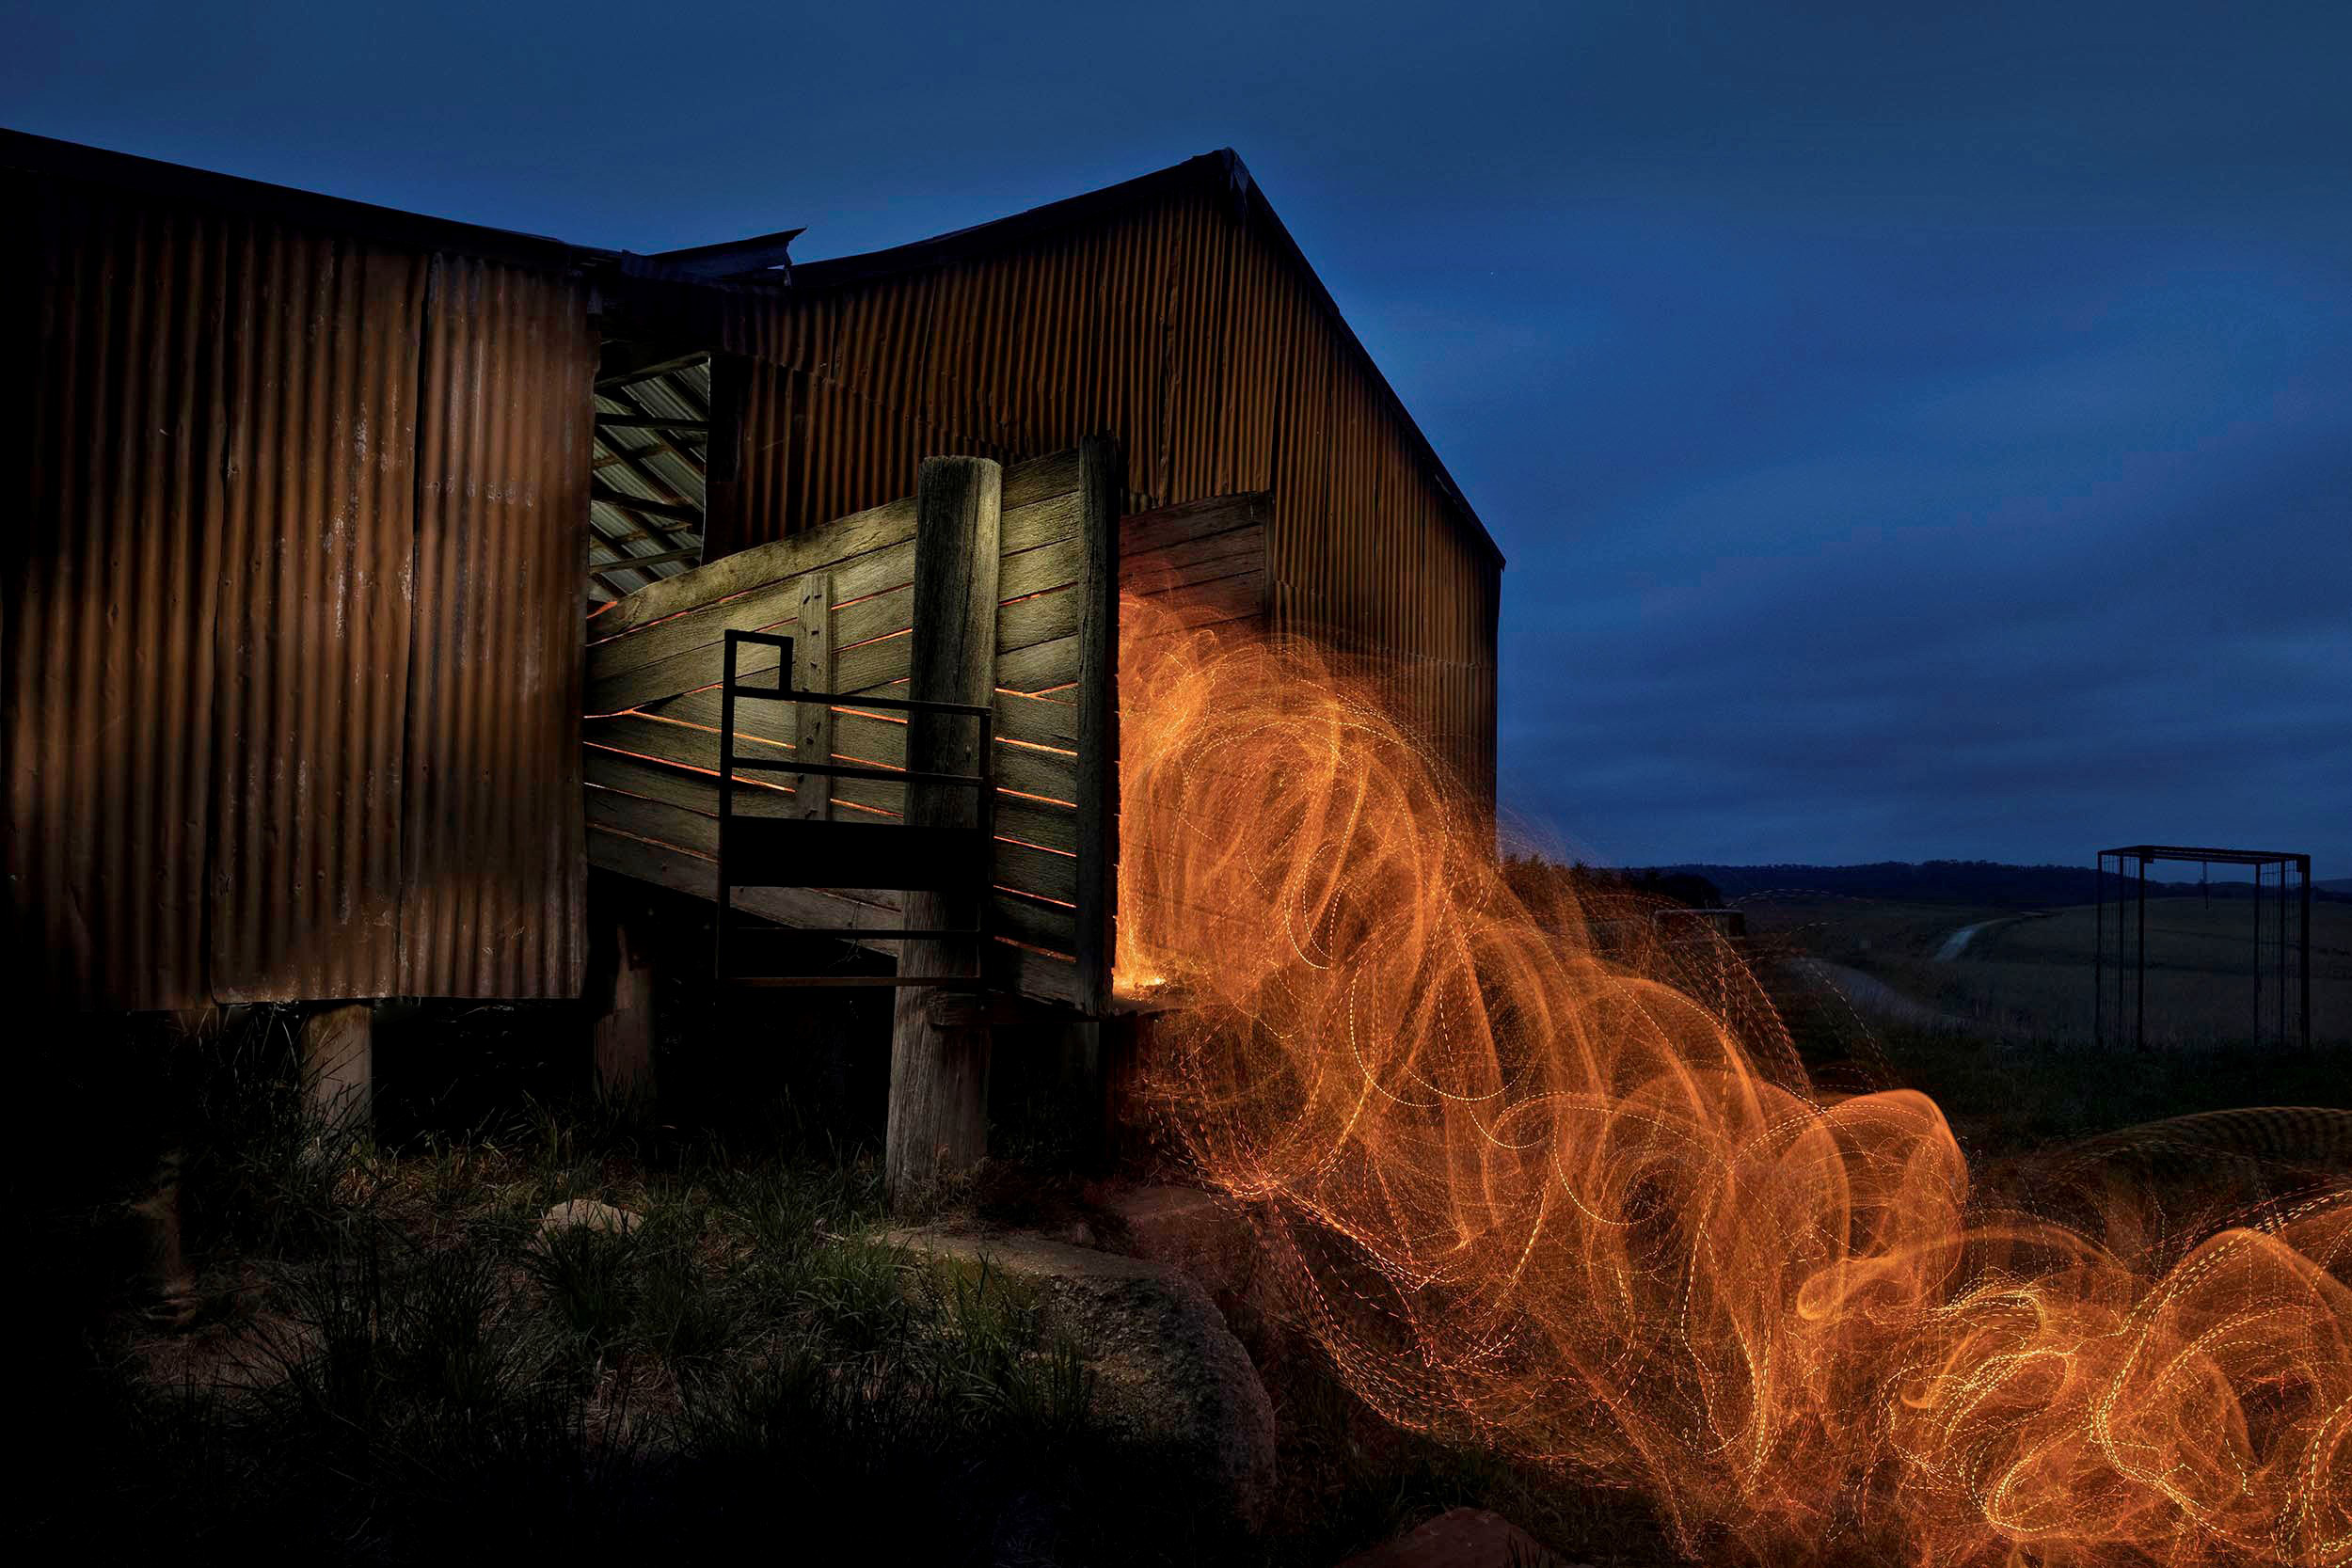 Photograph of a shed at night by Peter Solness.